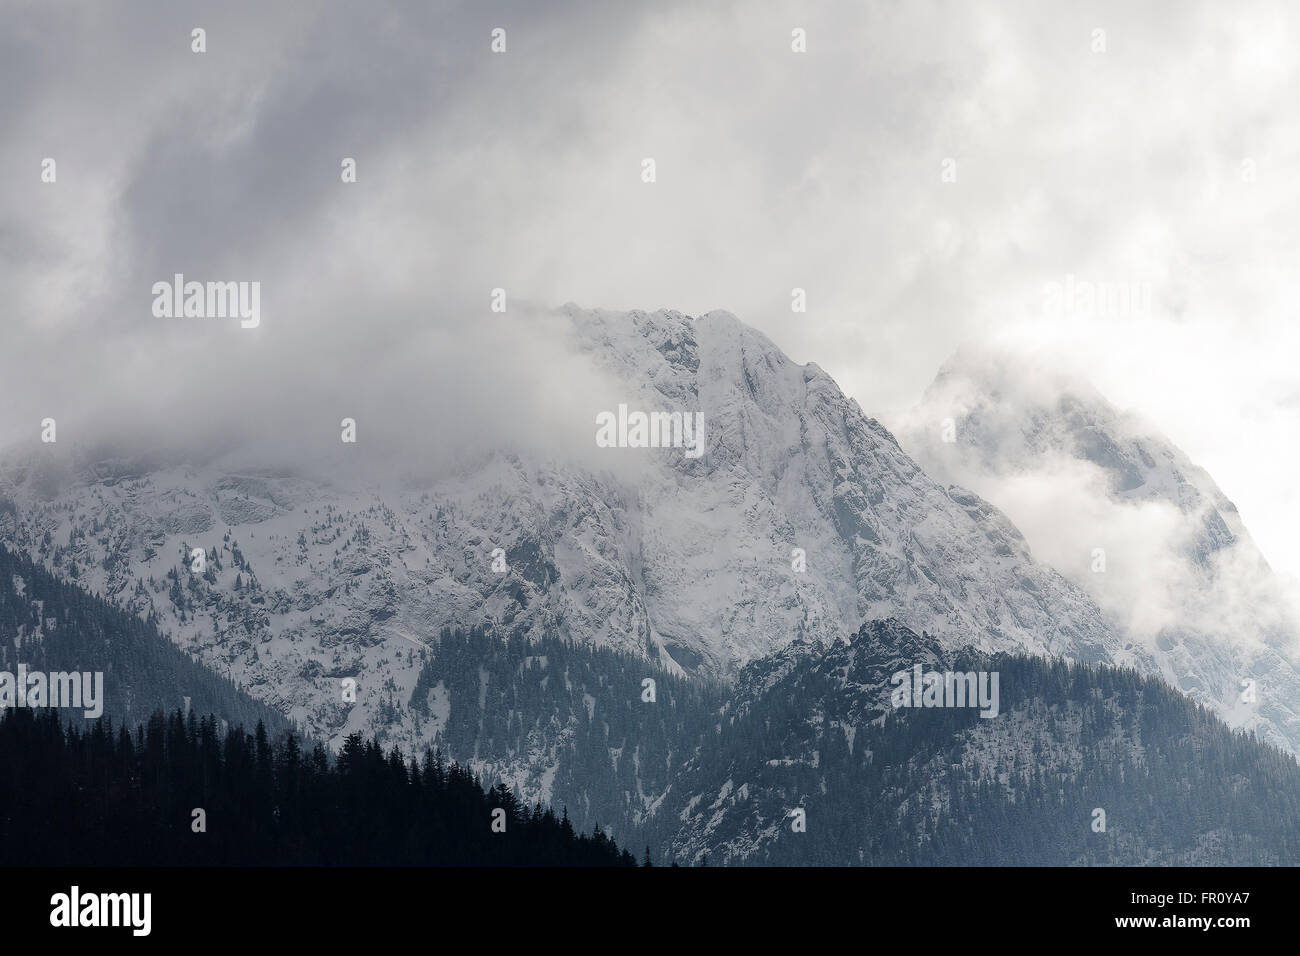 Mountain called Giewont in the clouds Stock Photo